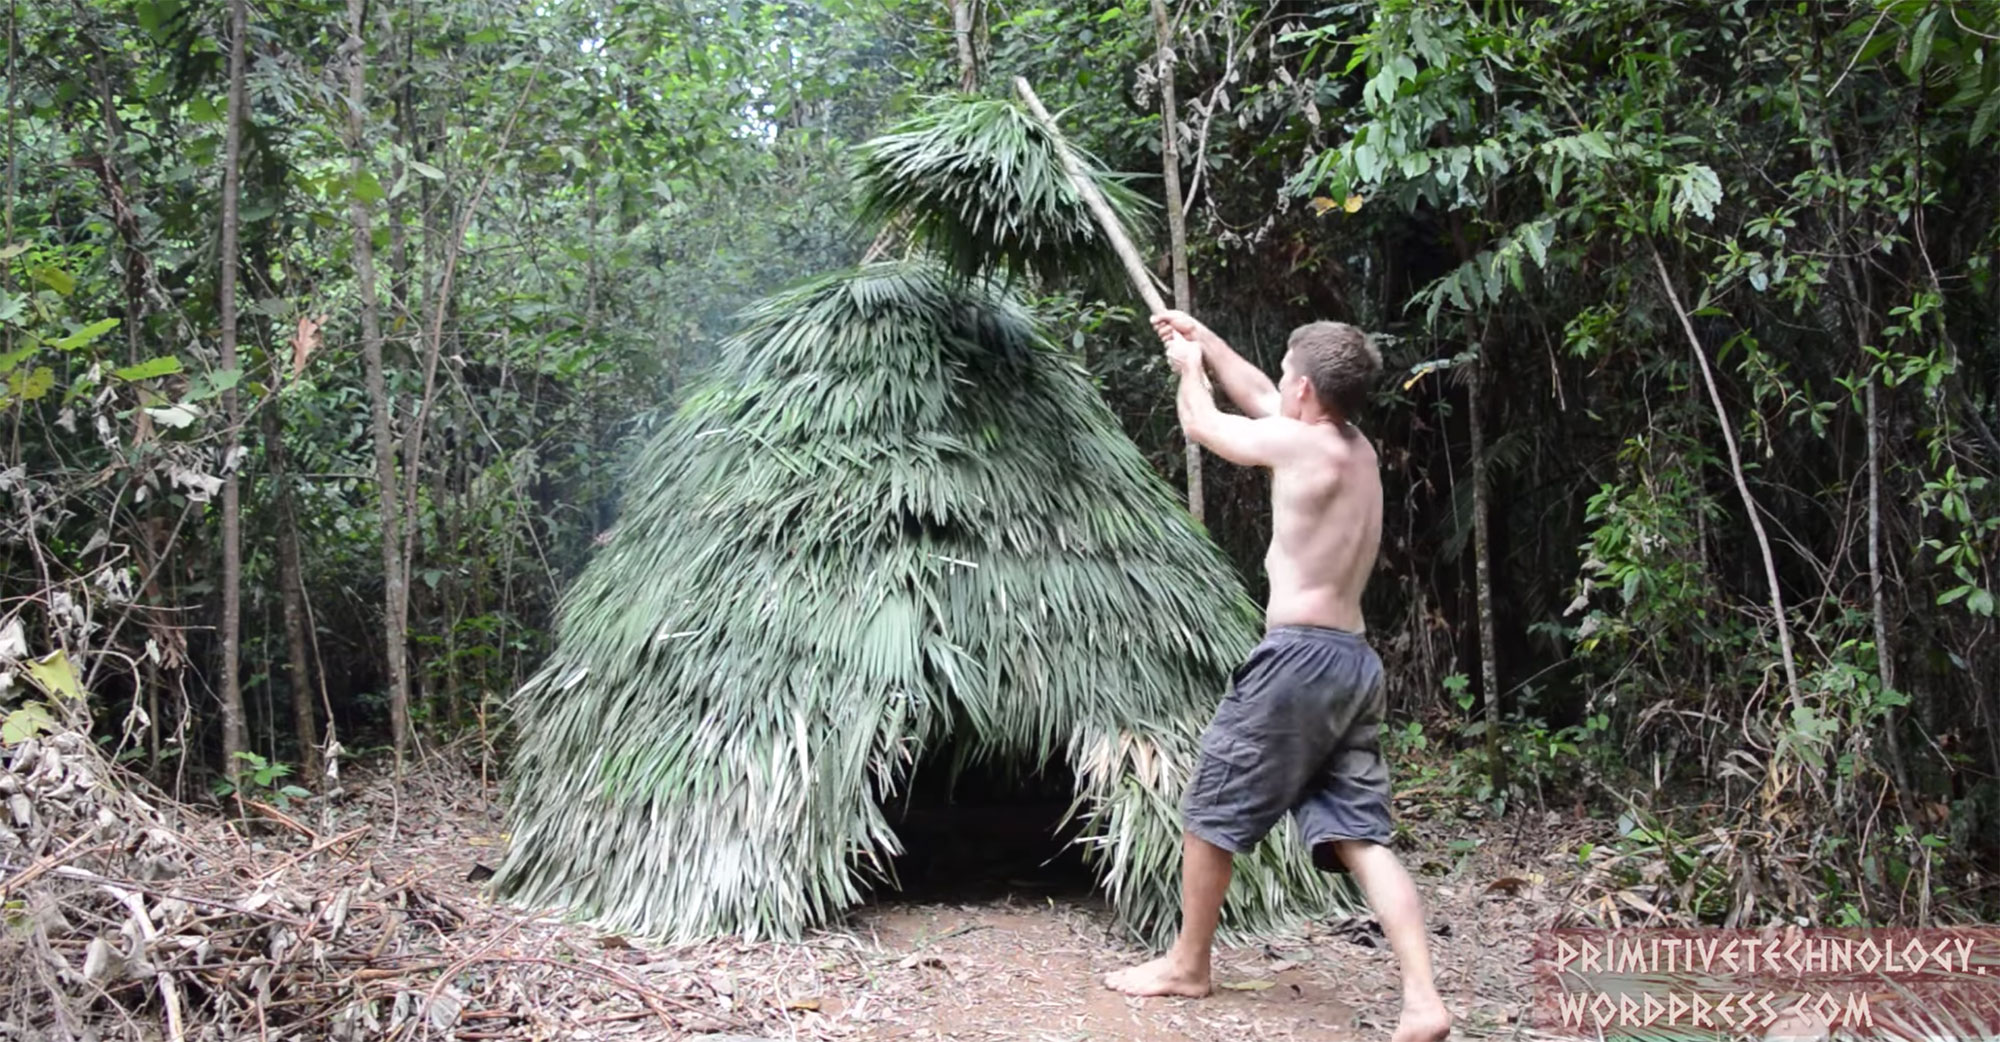 Watch: Palm Leaf Hut Built Completely From Scratch